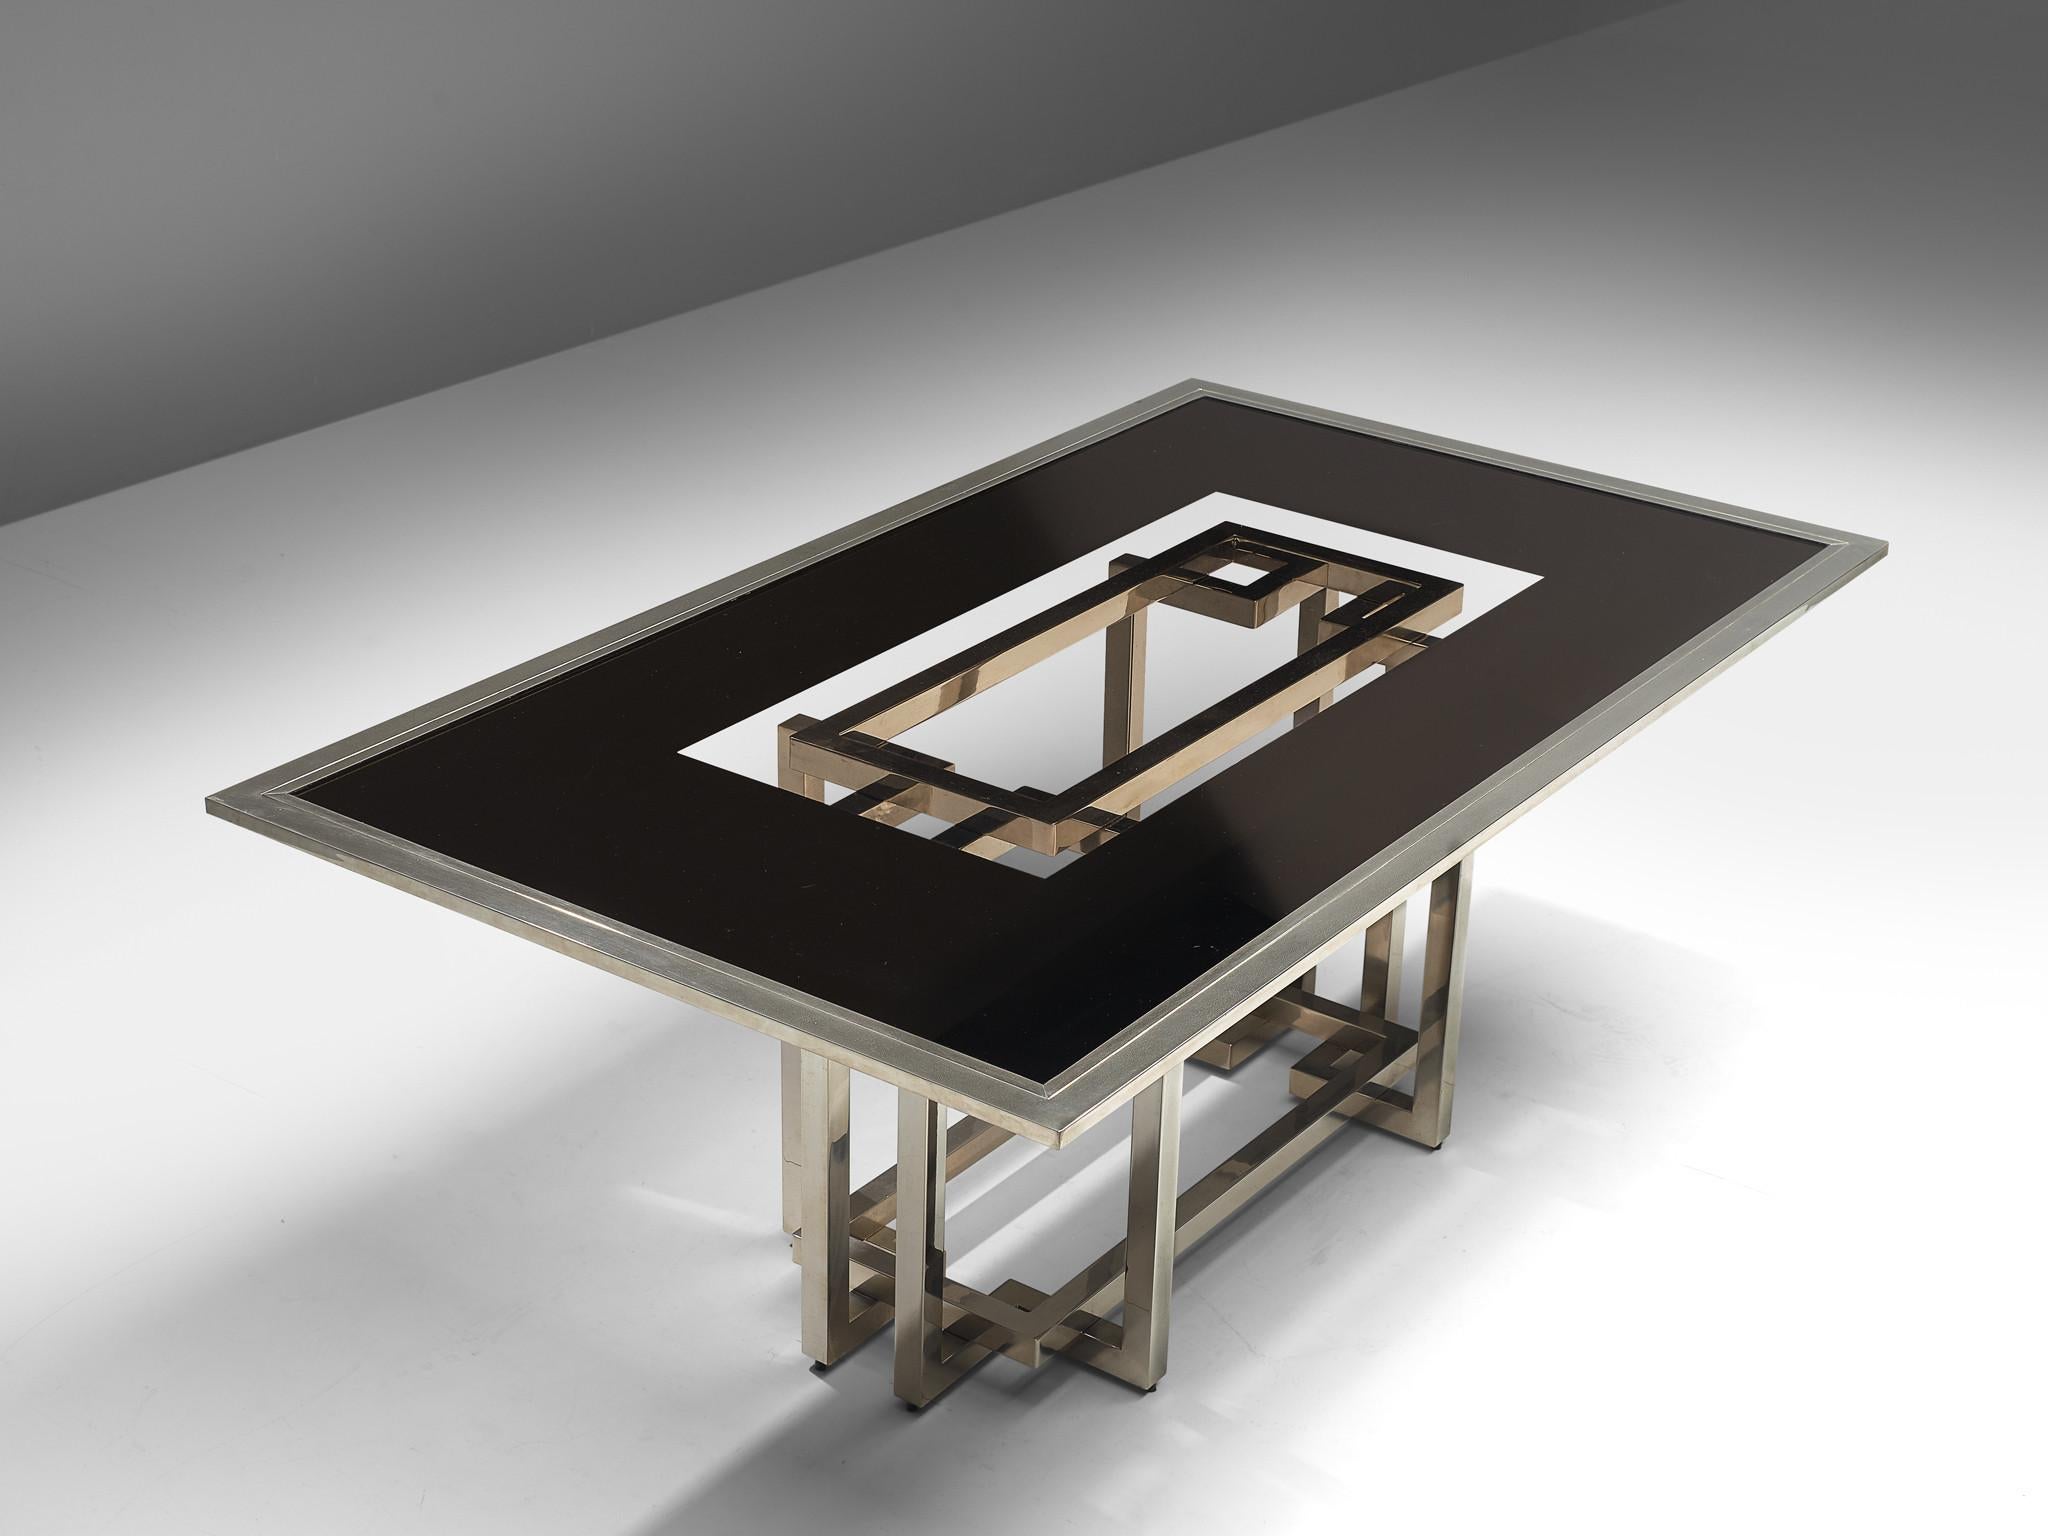 Dining table, chromed metal, glass, Europe, 1970s

This eccentric table epitomizes an expressive sculptural base in which you can see the work of a designer and artisan. The composition of the frame is based on right-angles shapes and lines that